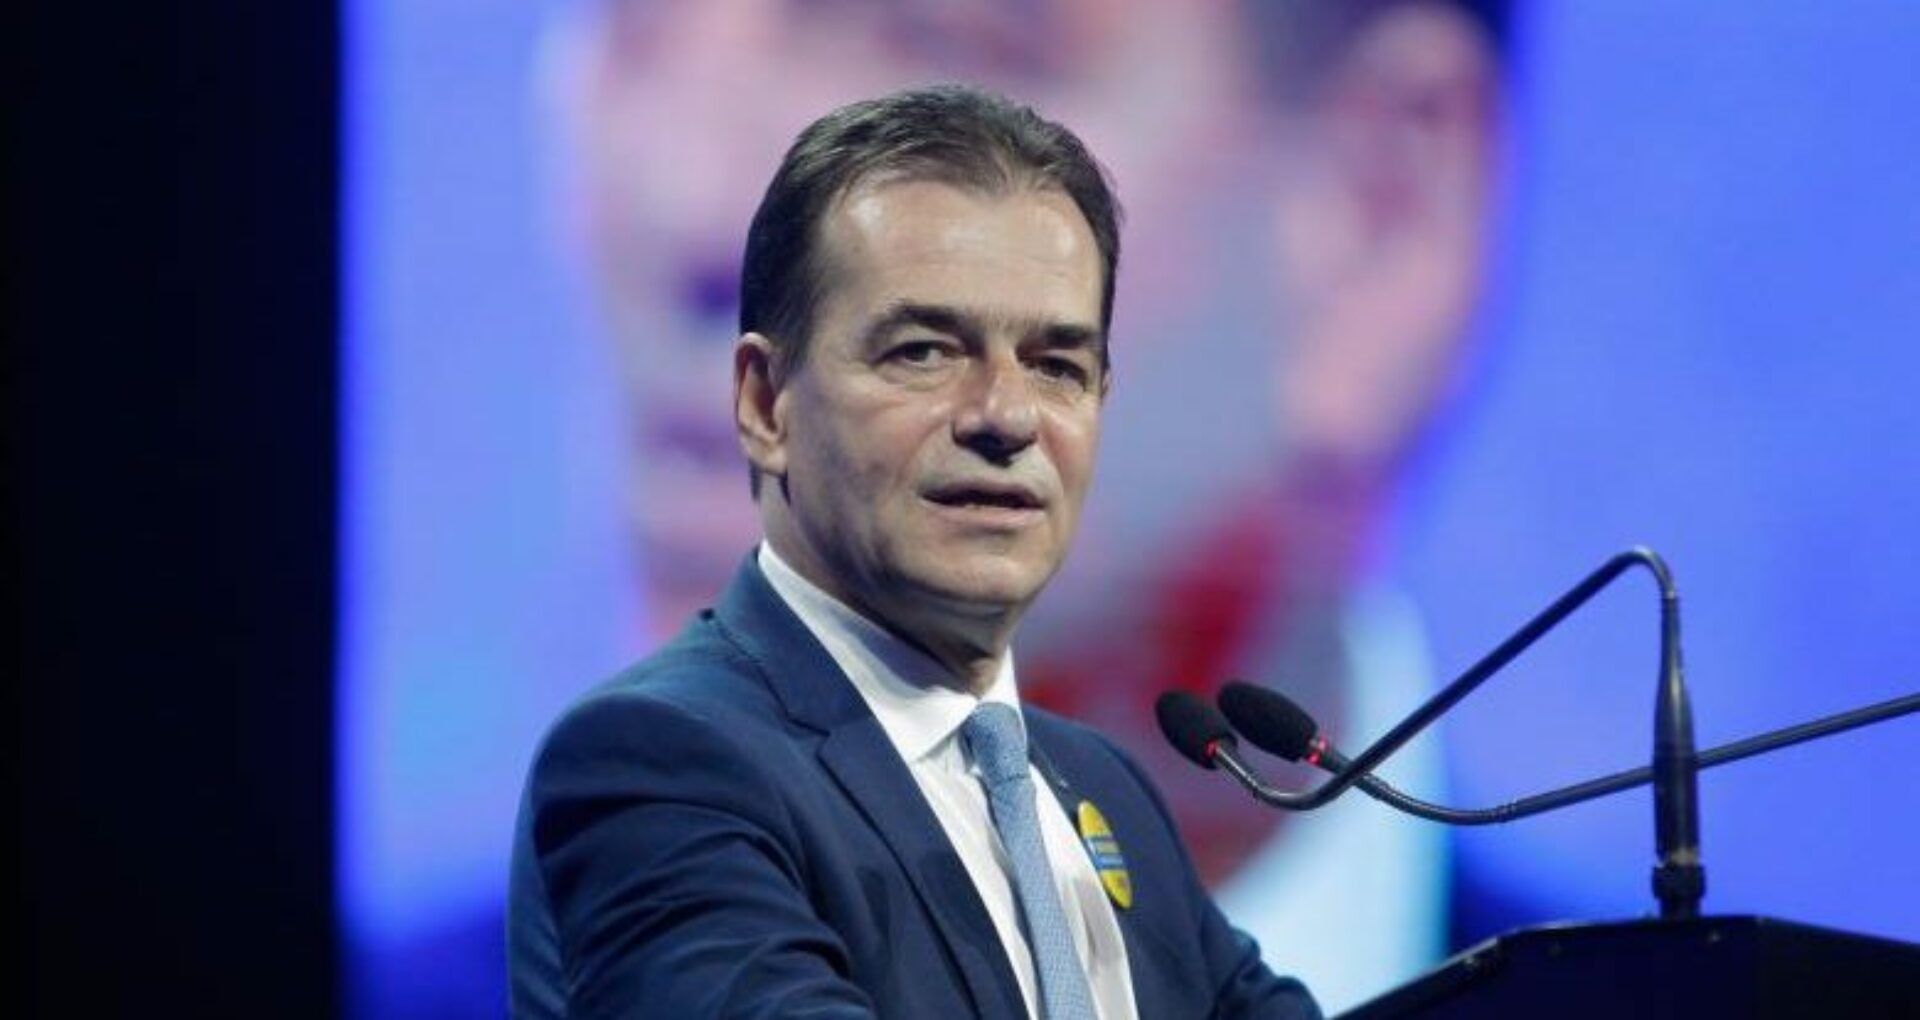 Ludovic Orban, the new Prime Minister of Romania Will Make His First Foreign Visit to Moldova